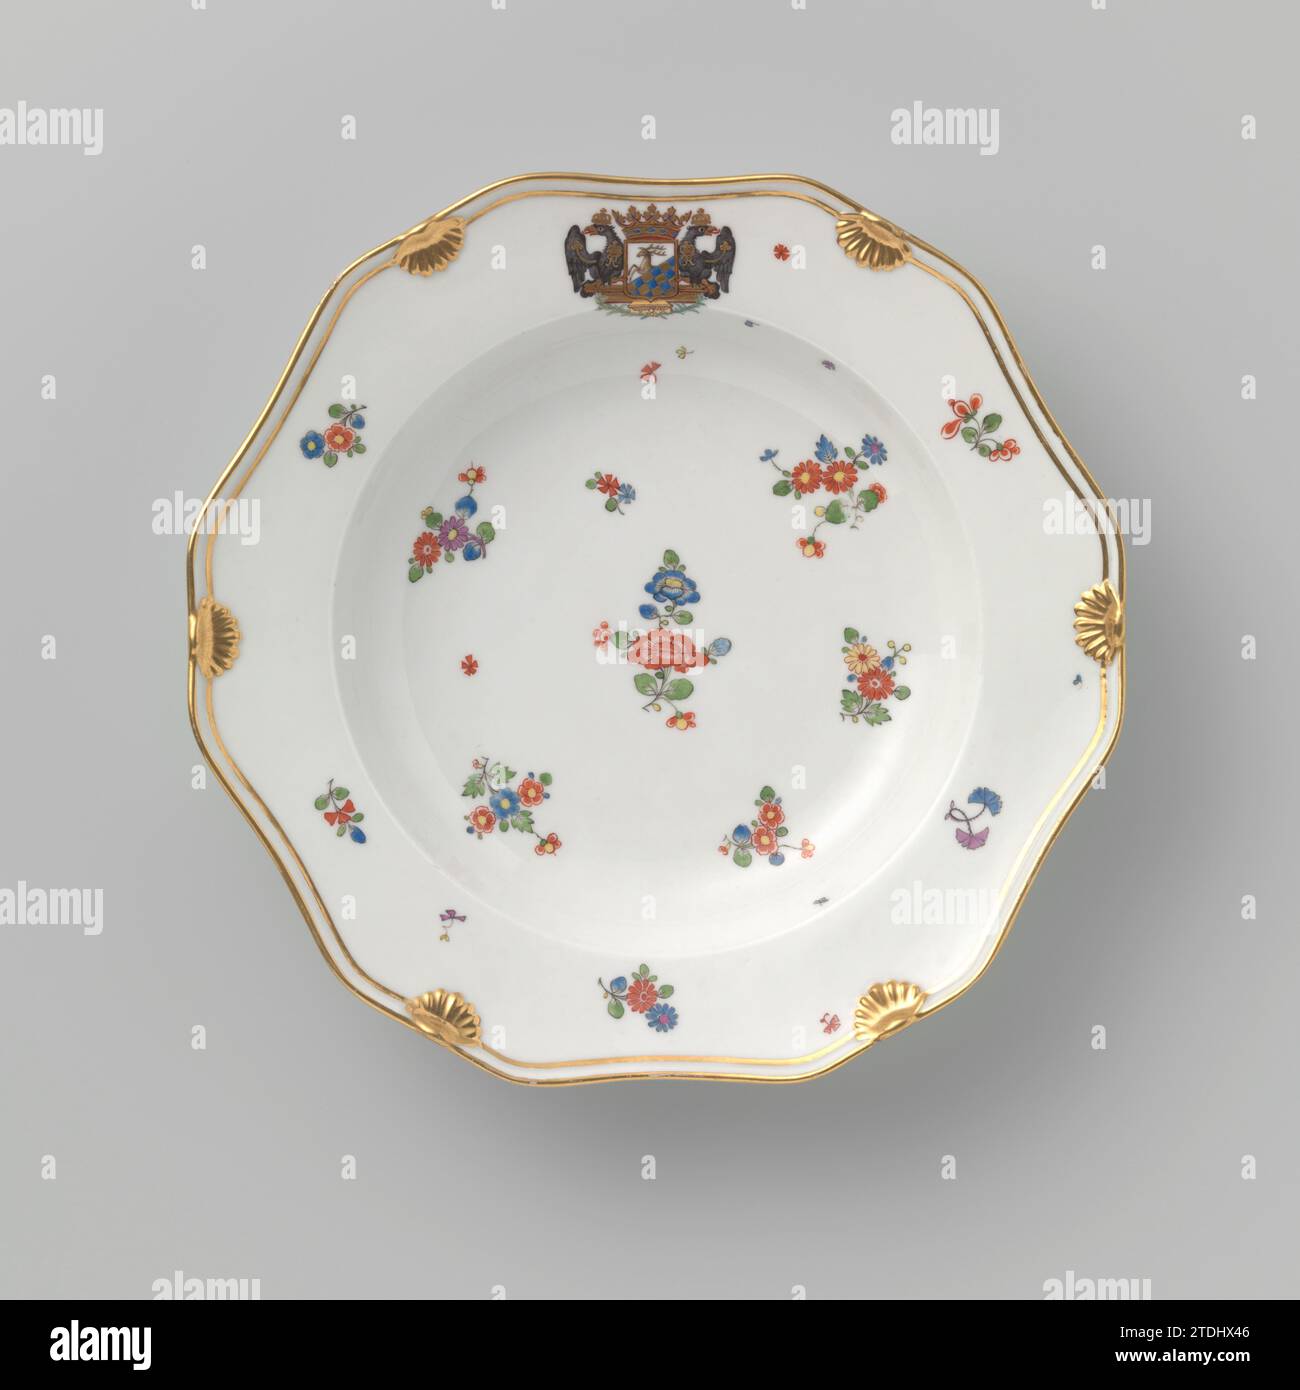 Plate with the Coat of Ams of Count Heinrich von Podewils and Flower Sprays, royal porcelain manufactory, c. 1763 - c. 1800 Twelve -angled plate of porcelain, painted on the glaze in blue, red, pink, green, yellow, black and gold. On the flat, wall and the edge of flower branches and sprinkling flowers in the style of Japanese Kakiemon porcelain. The crowned weapon of Count Heinrich von Podewils (1695-1760) on the edge. Along the edge a double gold line interrupted by six shell motifs. The back with four scatter flowers. Marked on the bottom with the scepter and number 23. Berlin porcelain. gl Stock Photo